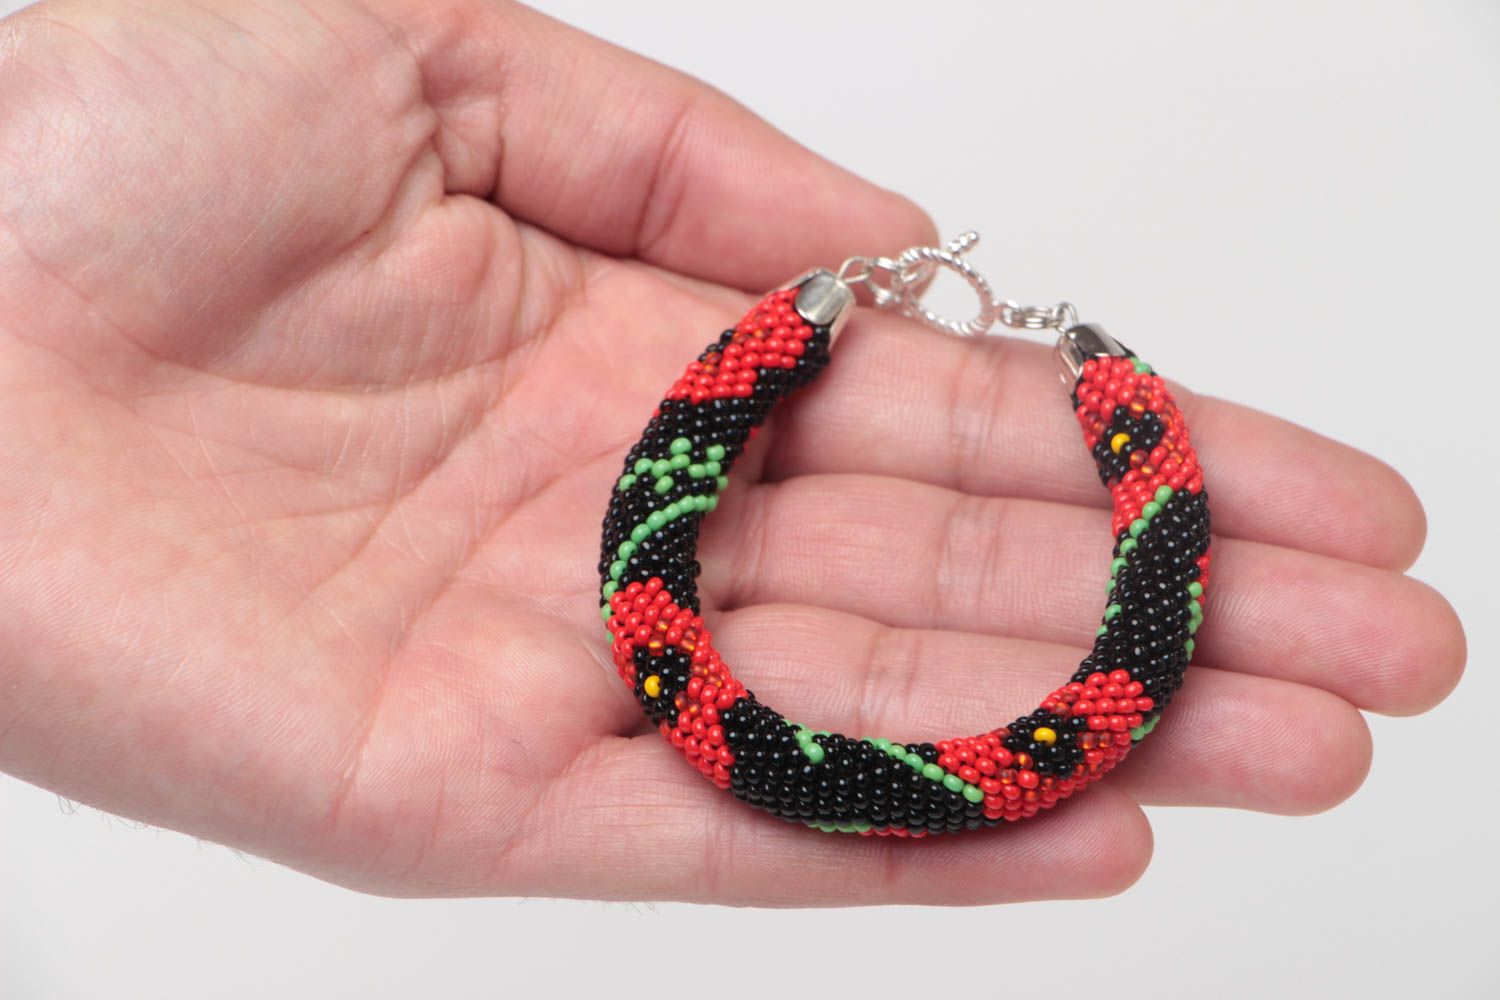 Handmade beaded cord bracelet with red floral pattern on black background photo 5